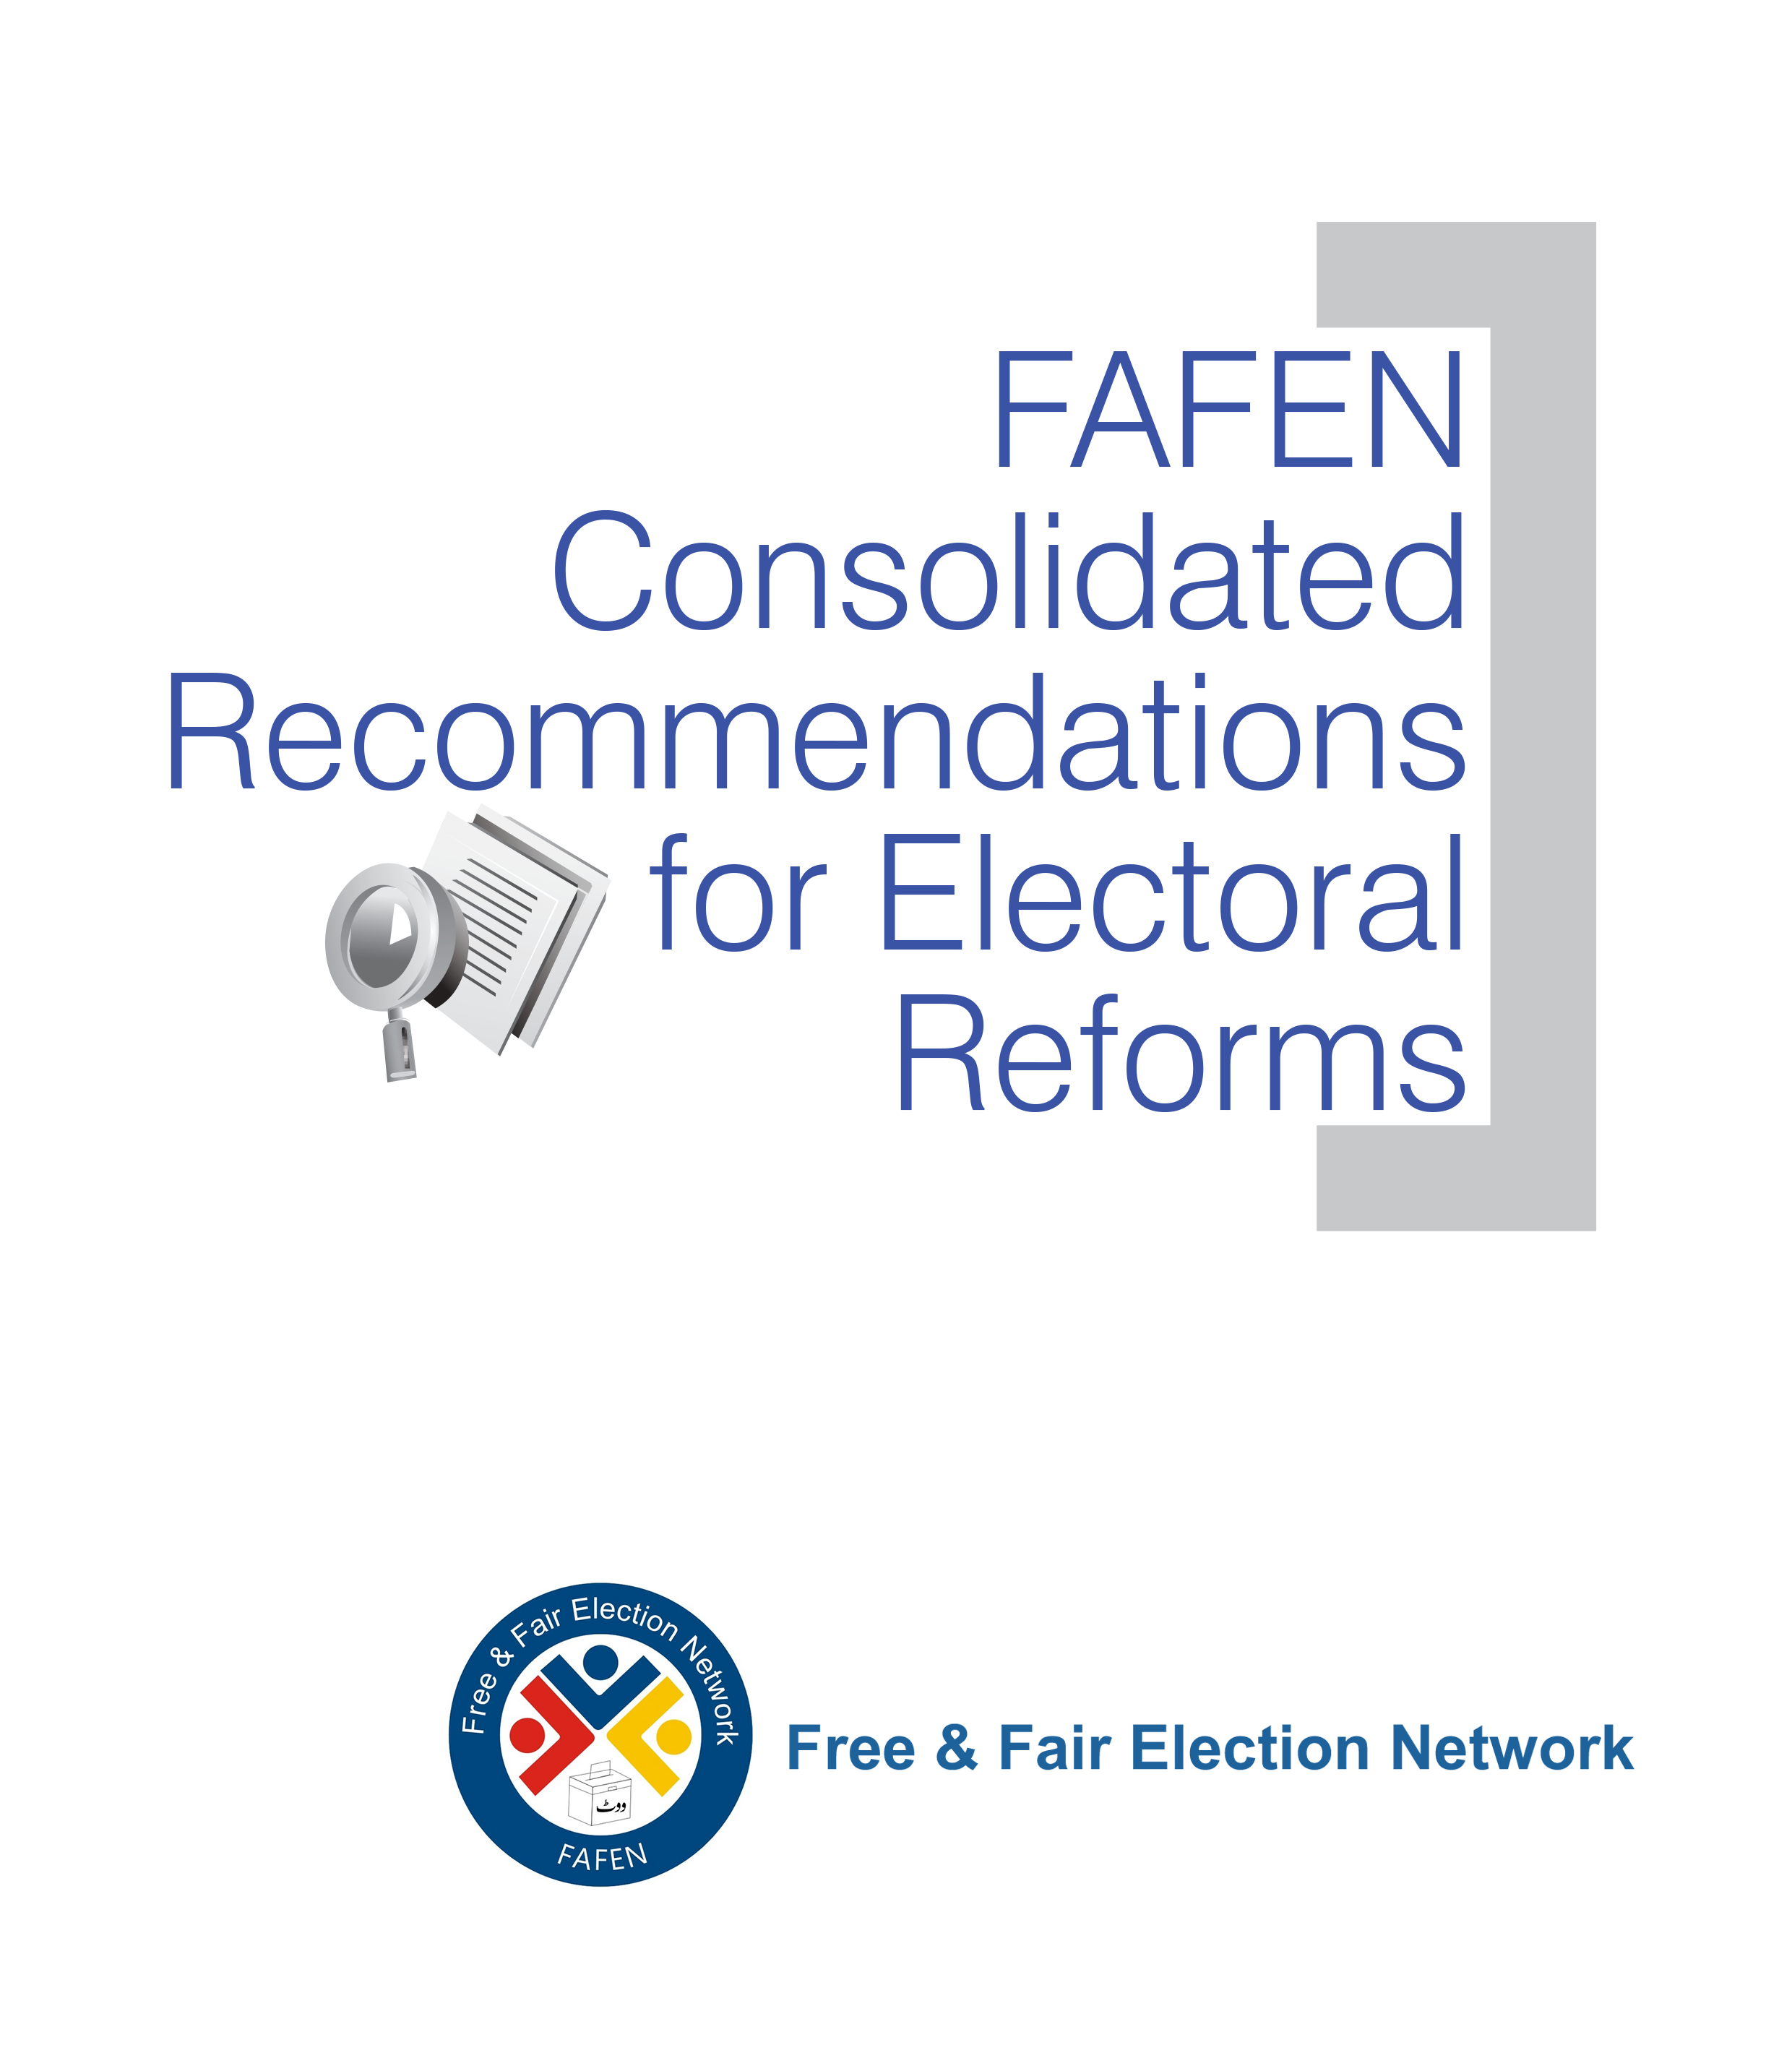 FAFEN Recommendations for Electoral Reforms (English Version)